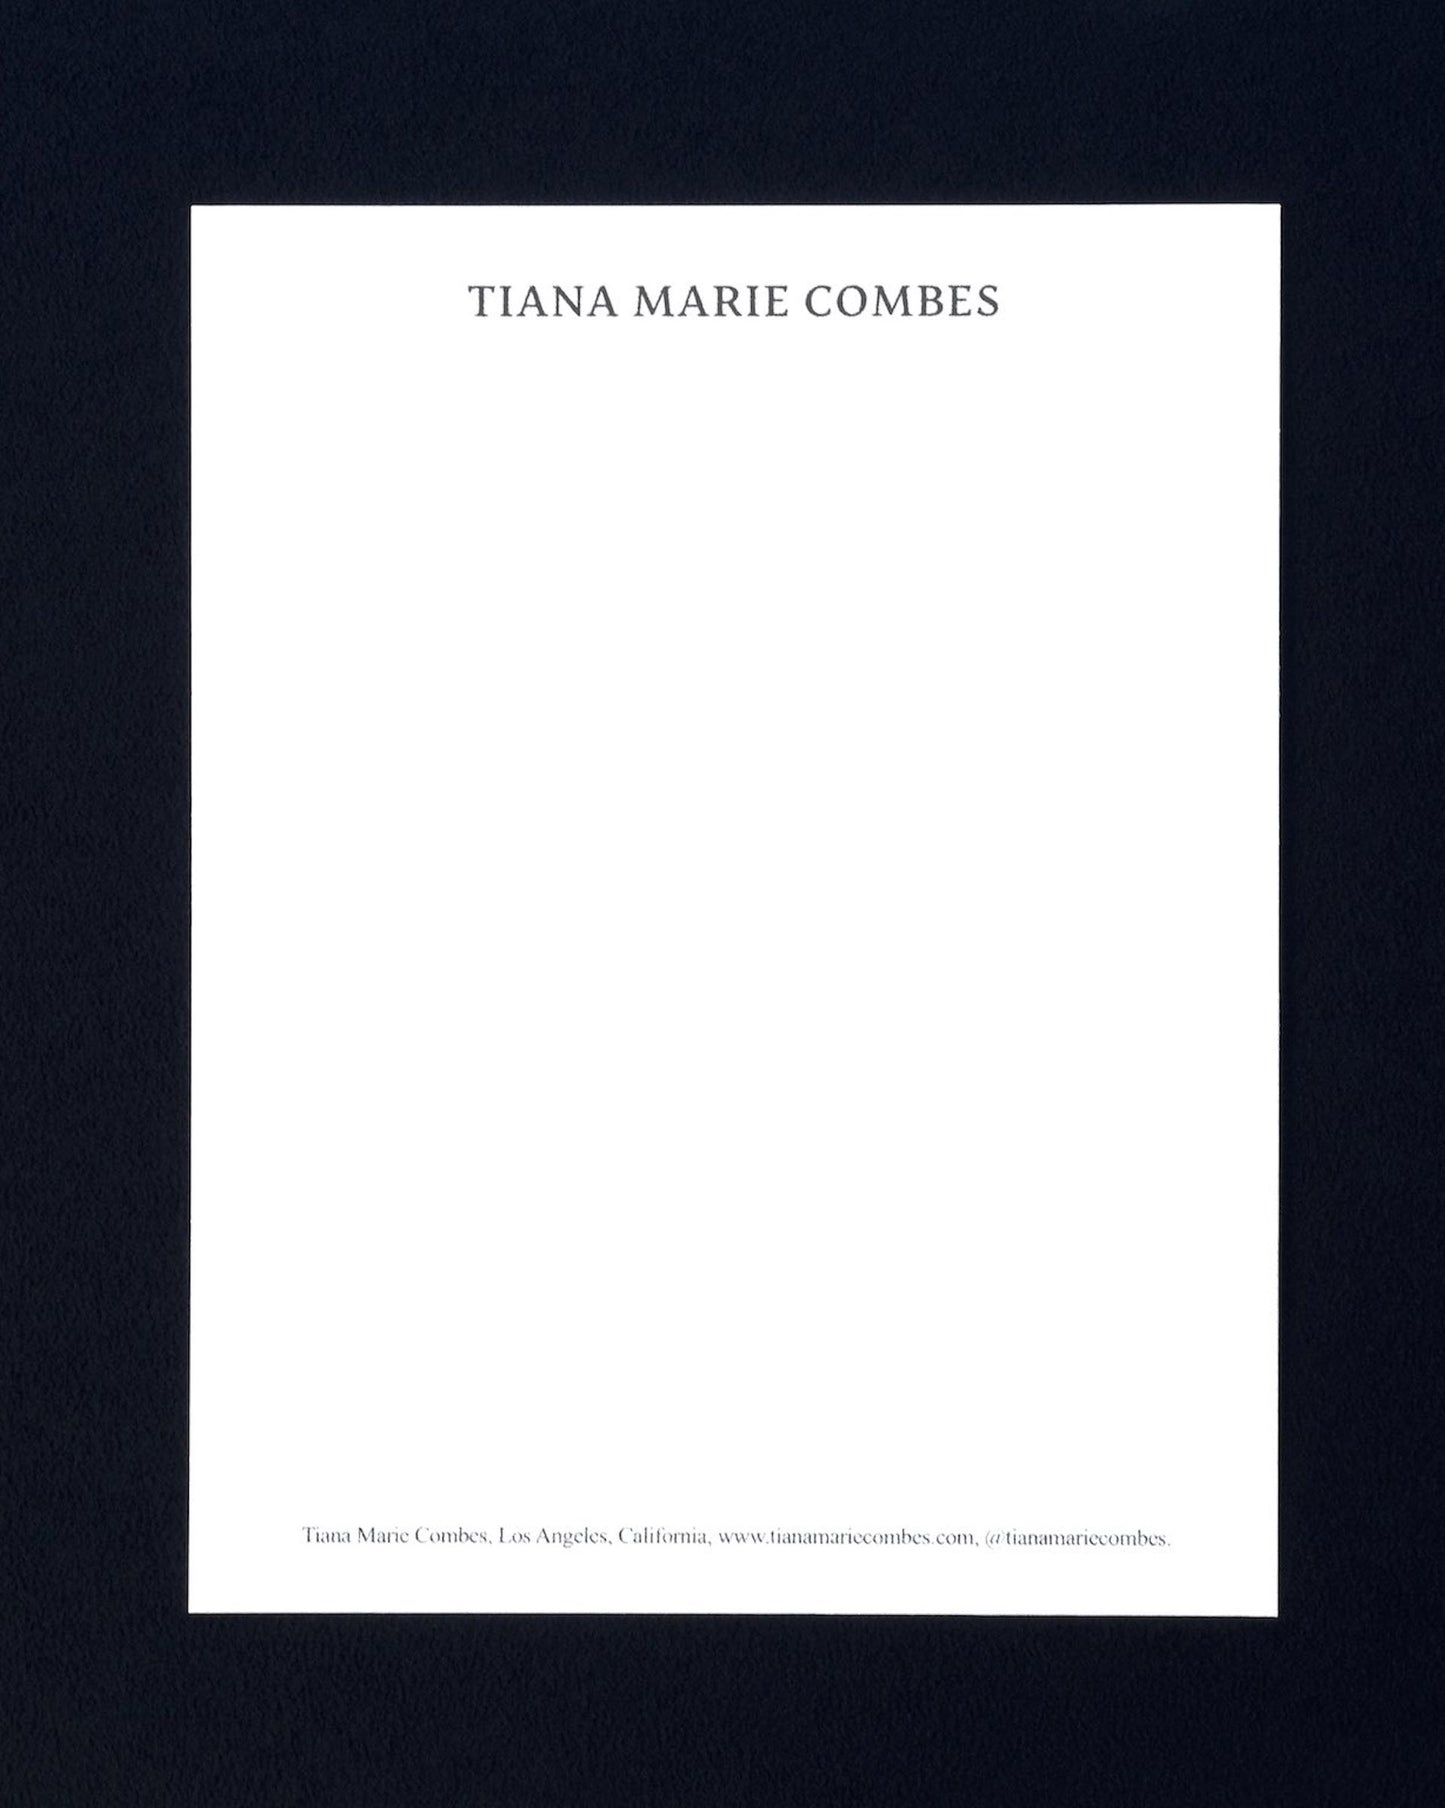 Tiana Marie Combes Gift Certificate.